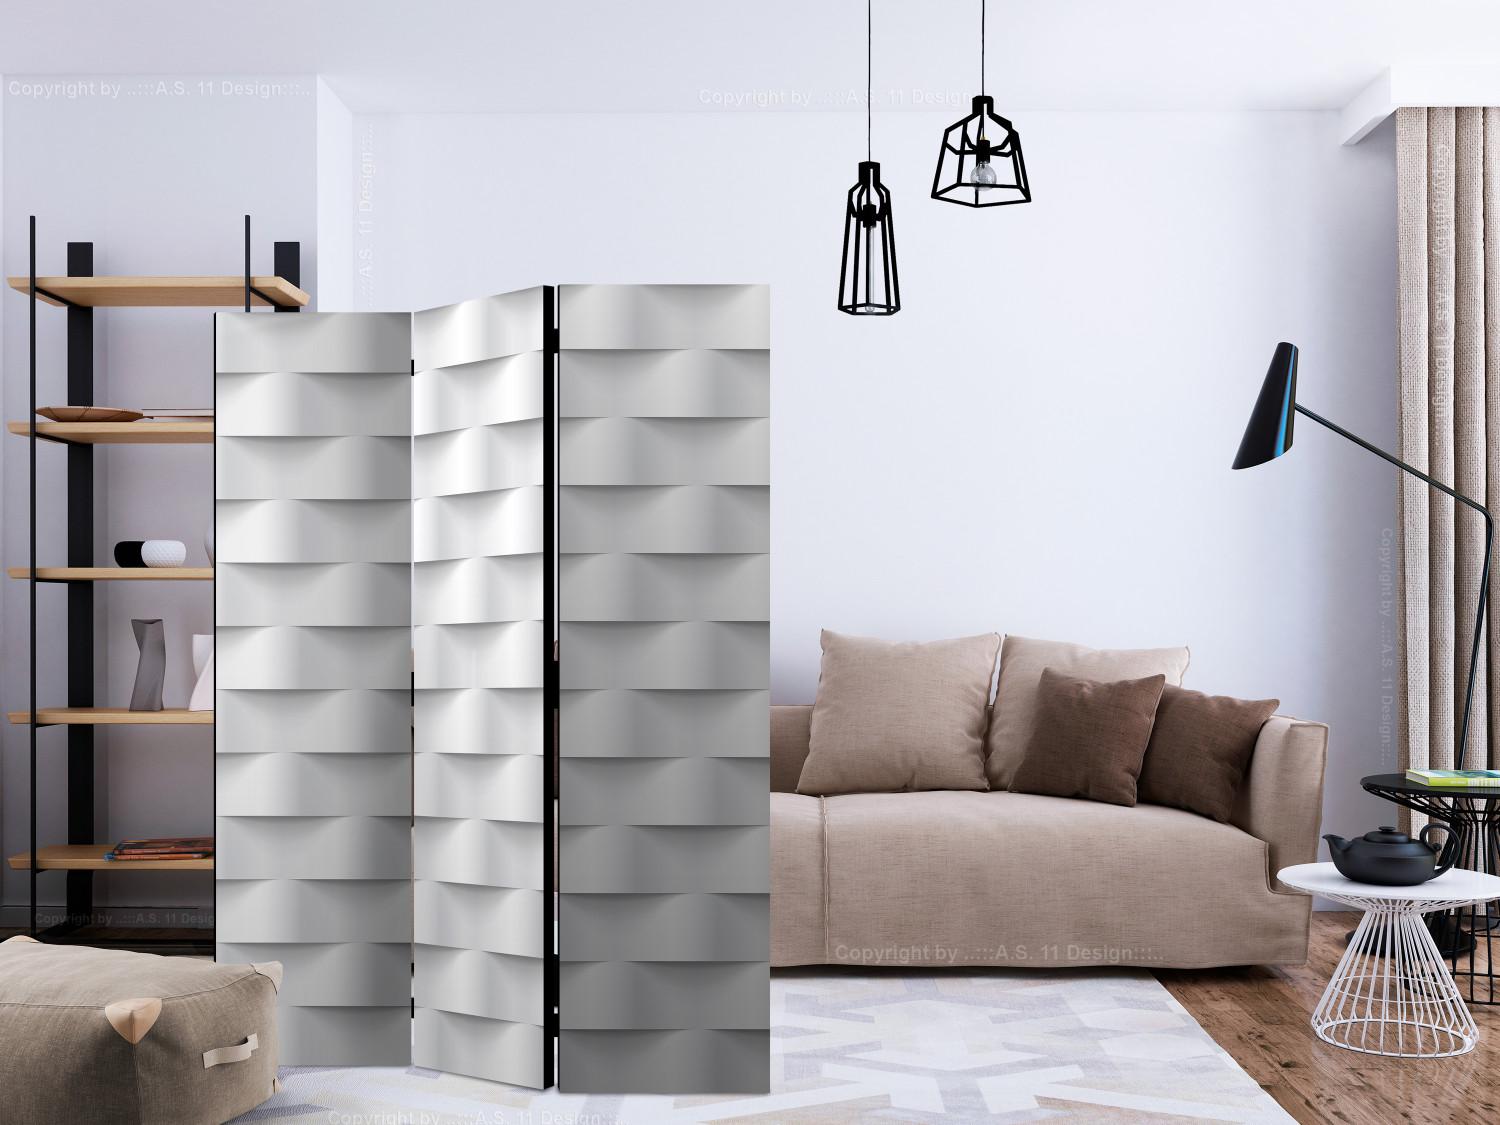 Room Divider White Illusion (3-piece) - unique abstraction in uniform pattern